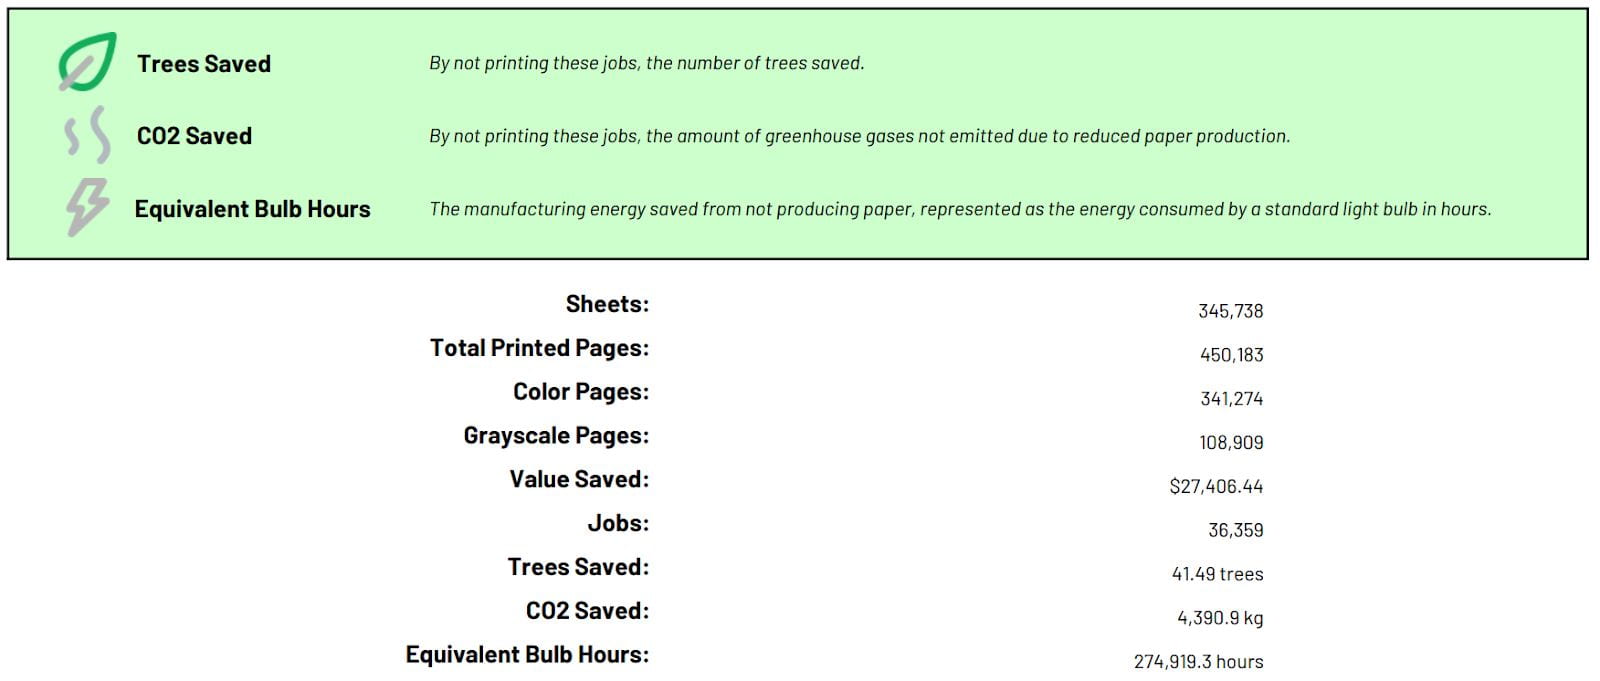 Chart representing the number of sheets, total printed pages, color pages, grayscale pages printed in 2023. The Value Saved was $27,408.44. The number of Trees saved was 41.48 and the CO2 saved was 4.390.9 kg.